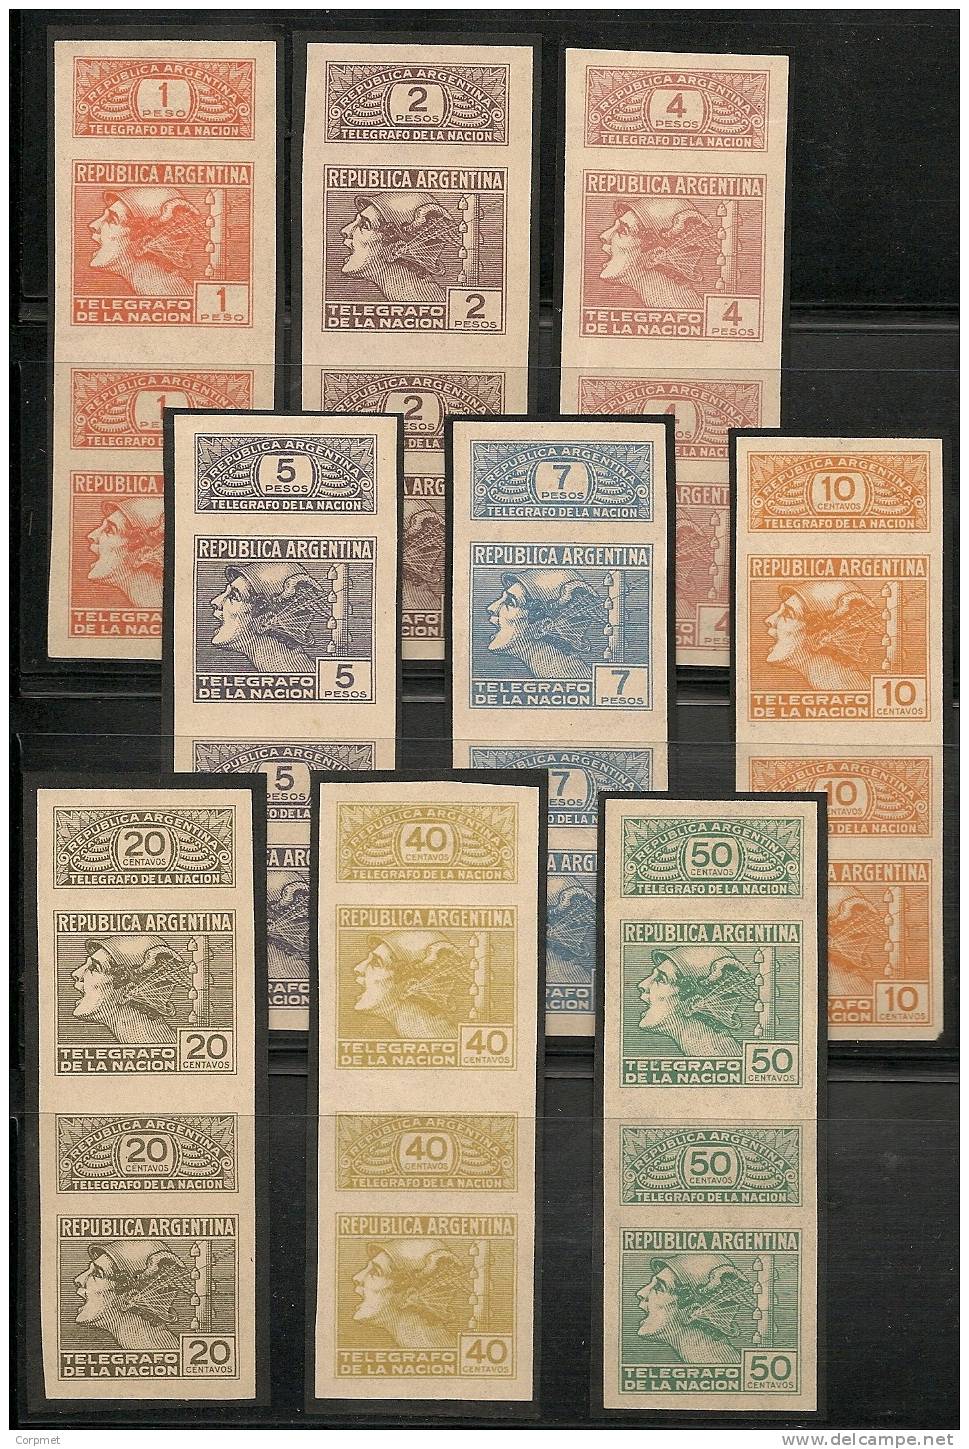 ARGENTINA - TELEGRAPH STAMPS - 1930 ESSAYS / PROOFS IMPERFORATE PAIRS In DIFF COLORS AND VALUES -Complete Set Of 9 - - Telegrafo